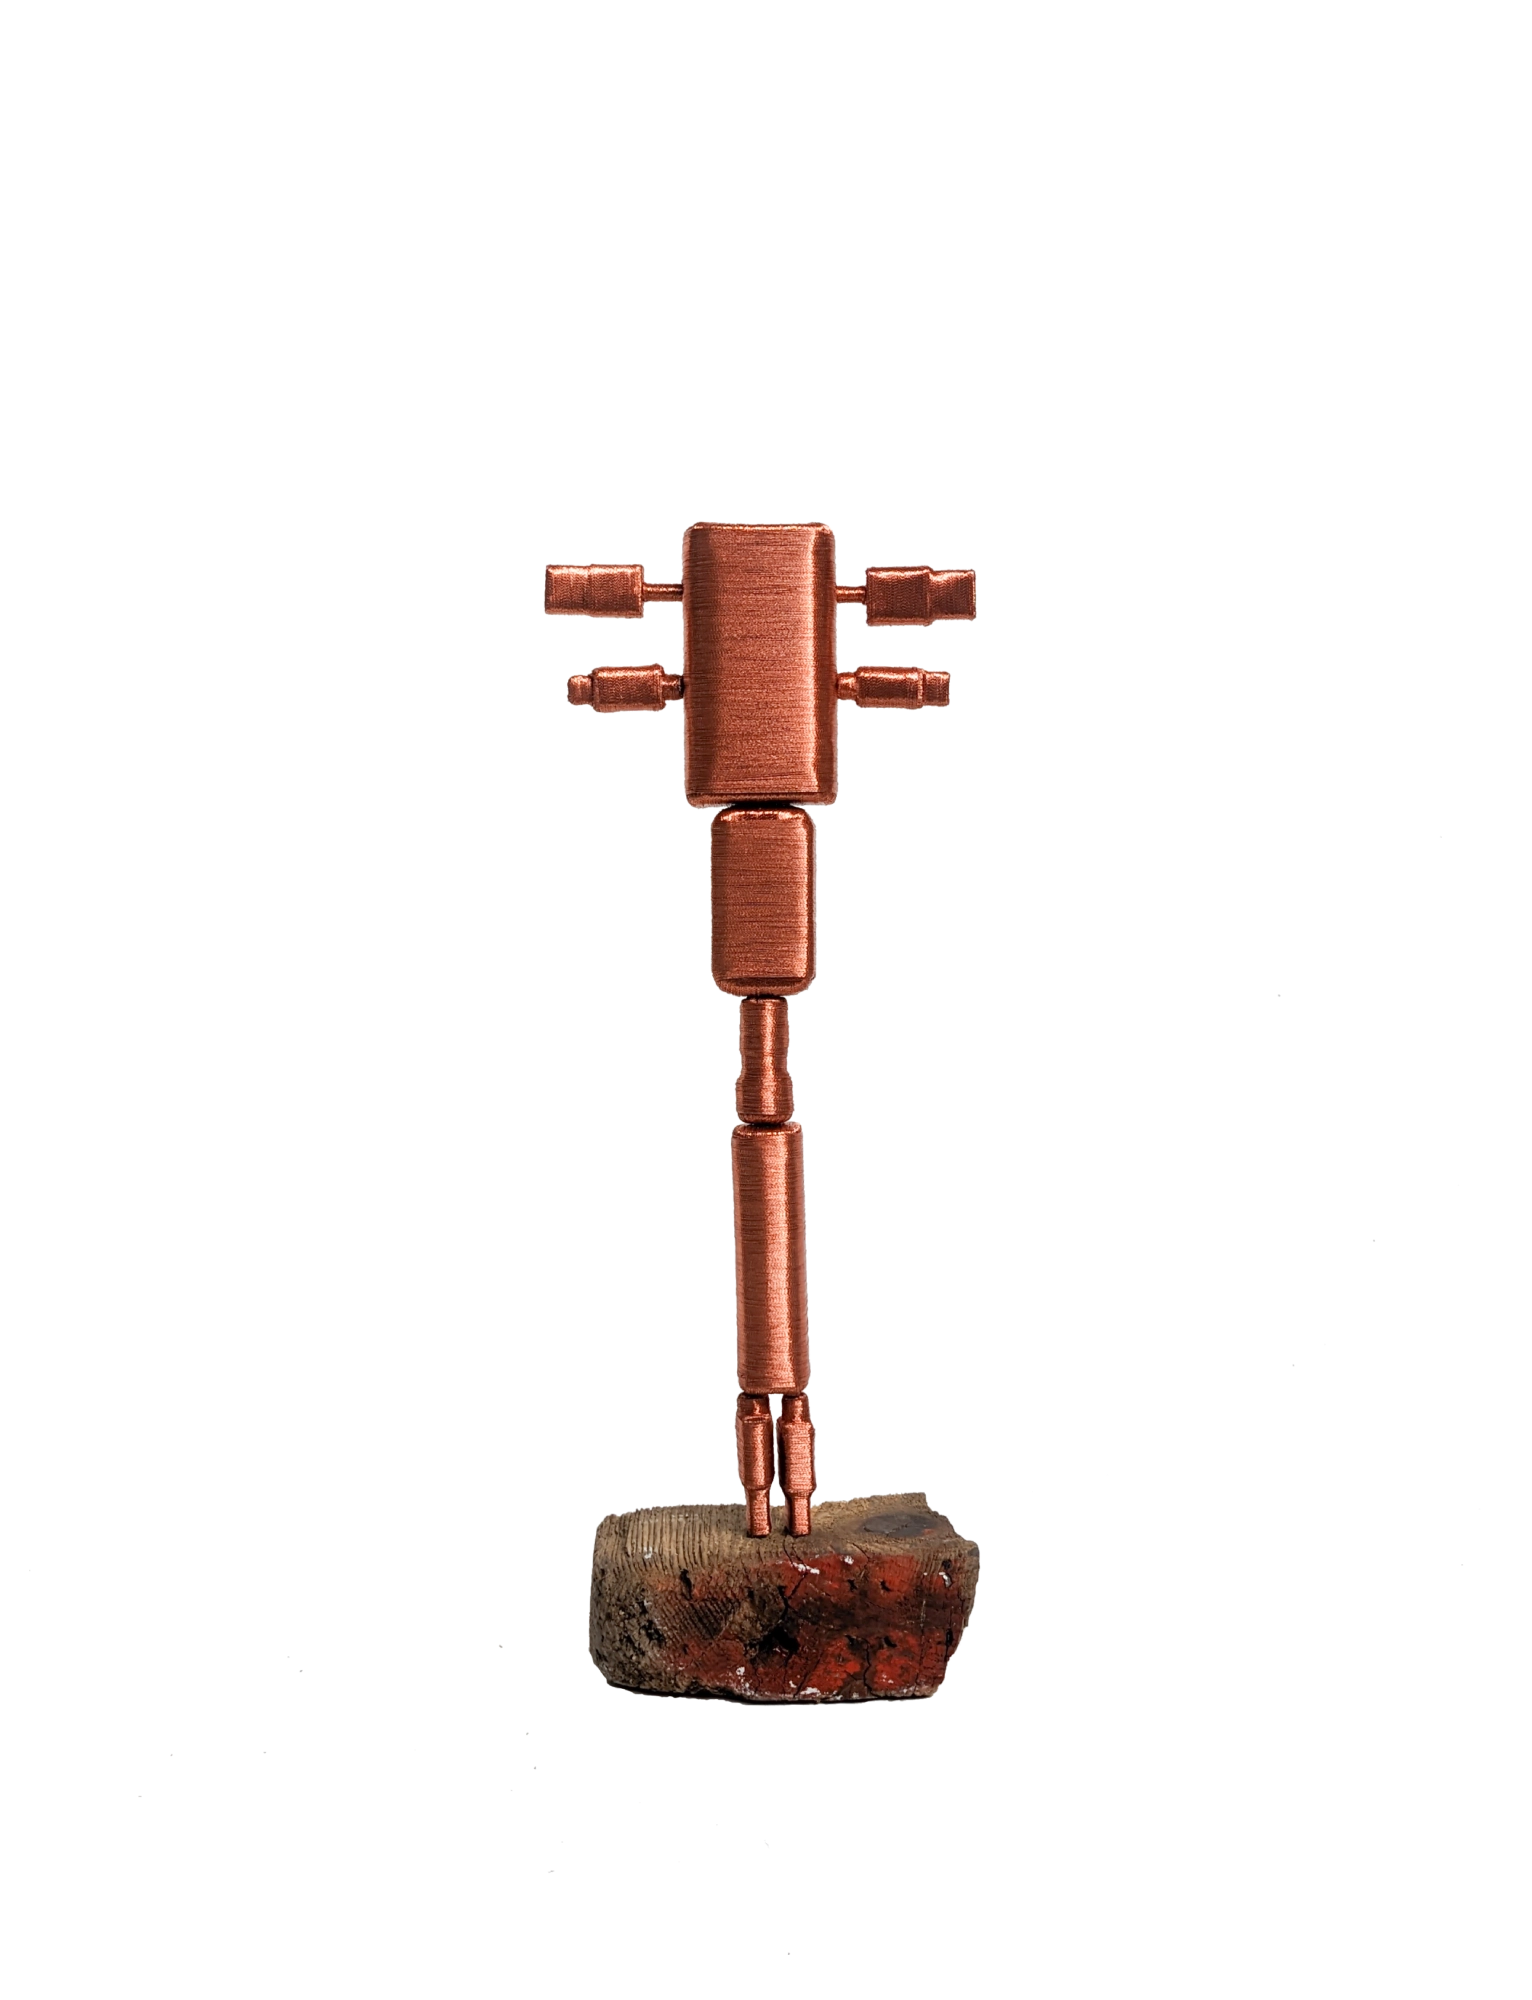 "Spiritual Machines, Statuette 89" recycled objects: Six usb plugs, two camera batteries, usb power adapter, coaxial plug, eco-friendly copper coloured wire, 26 × 12 cm, 2024